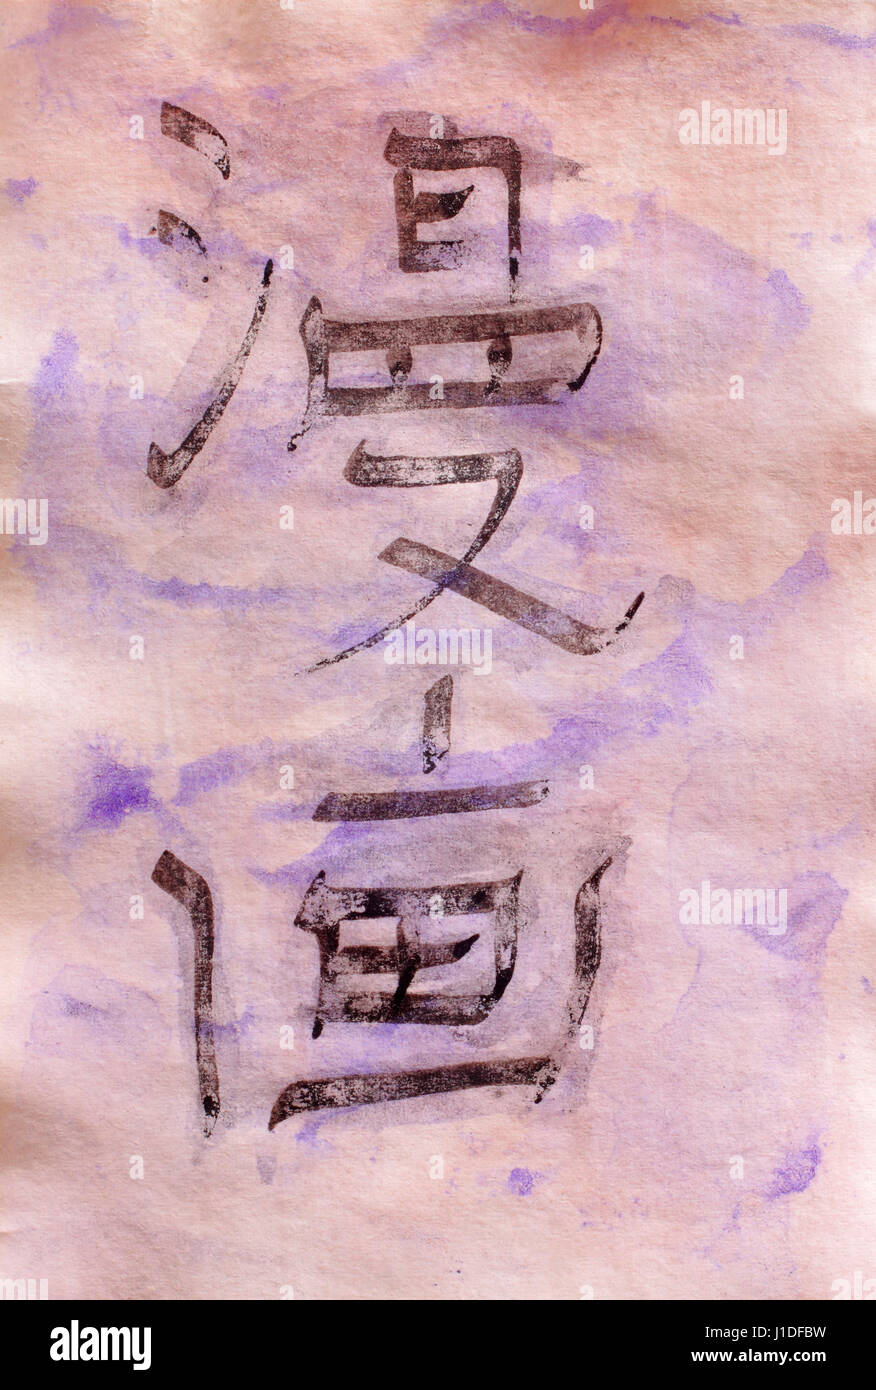 Japanese stylized modern kanji for manga in grunge style on a stained paper Stock Photo